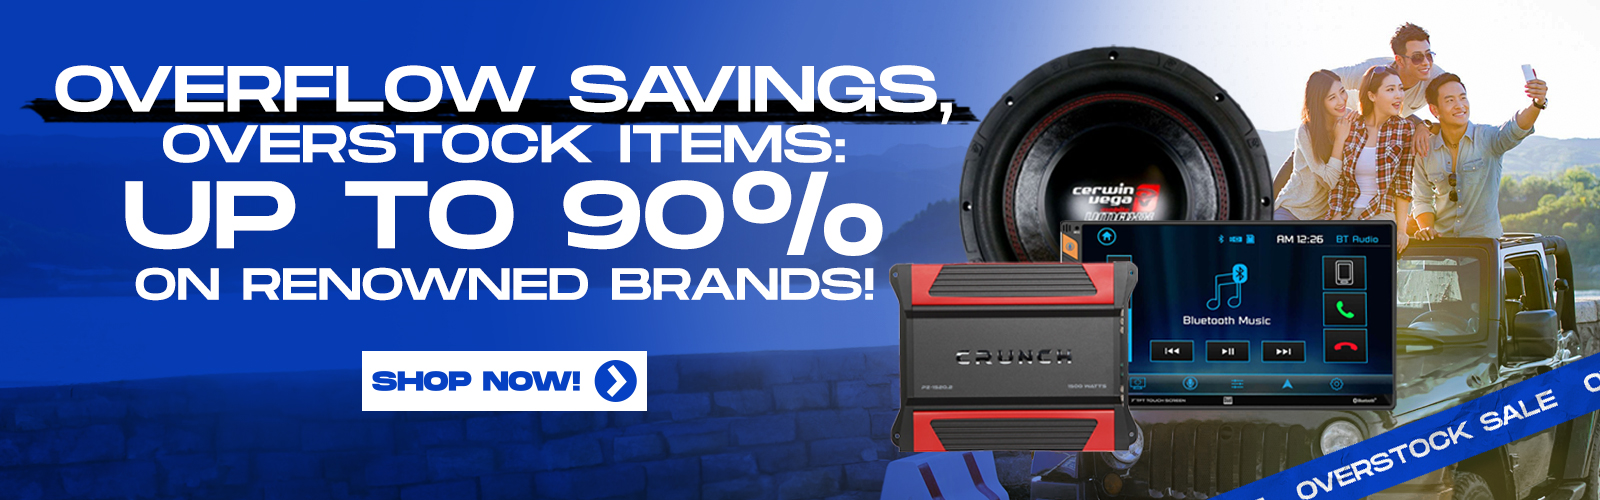  Wholesale Car Audio/Stereo Deals At Bargain Prices